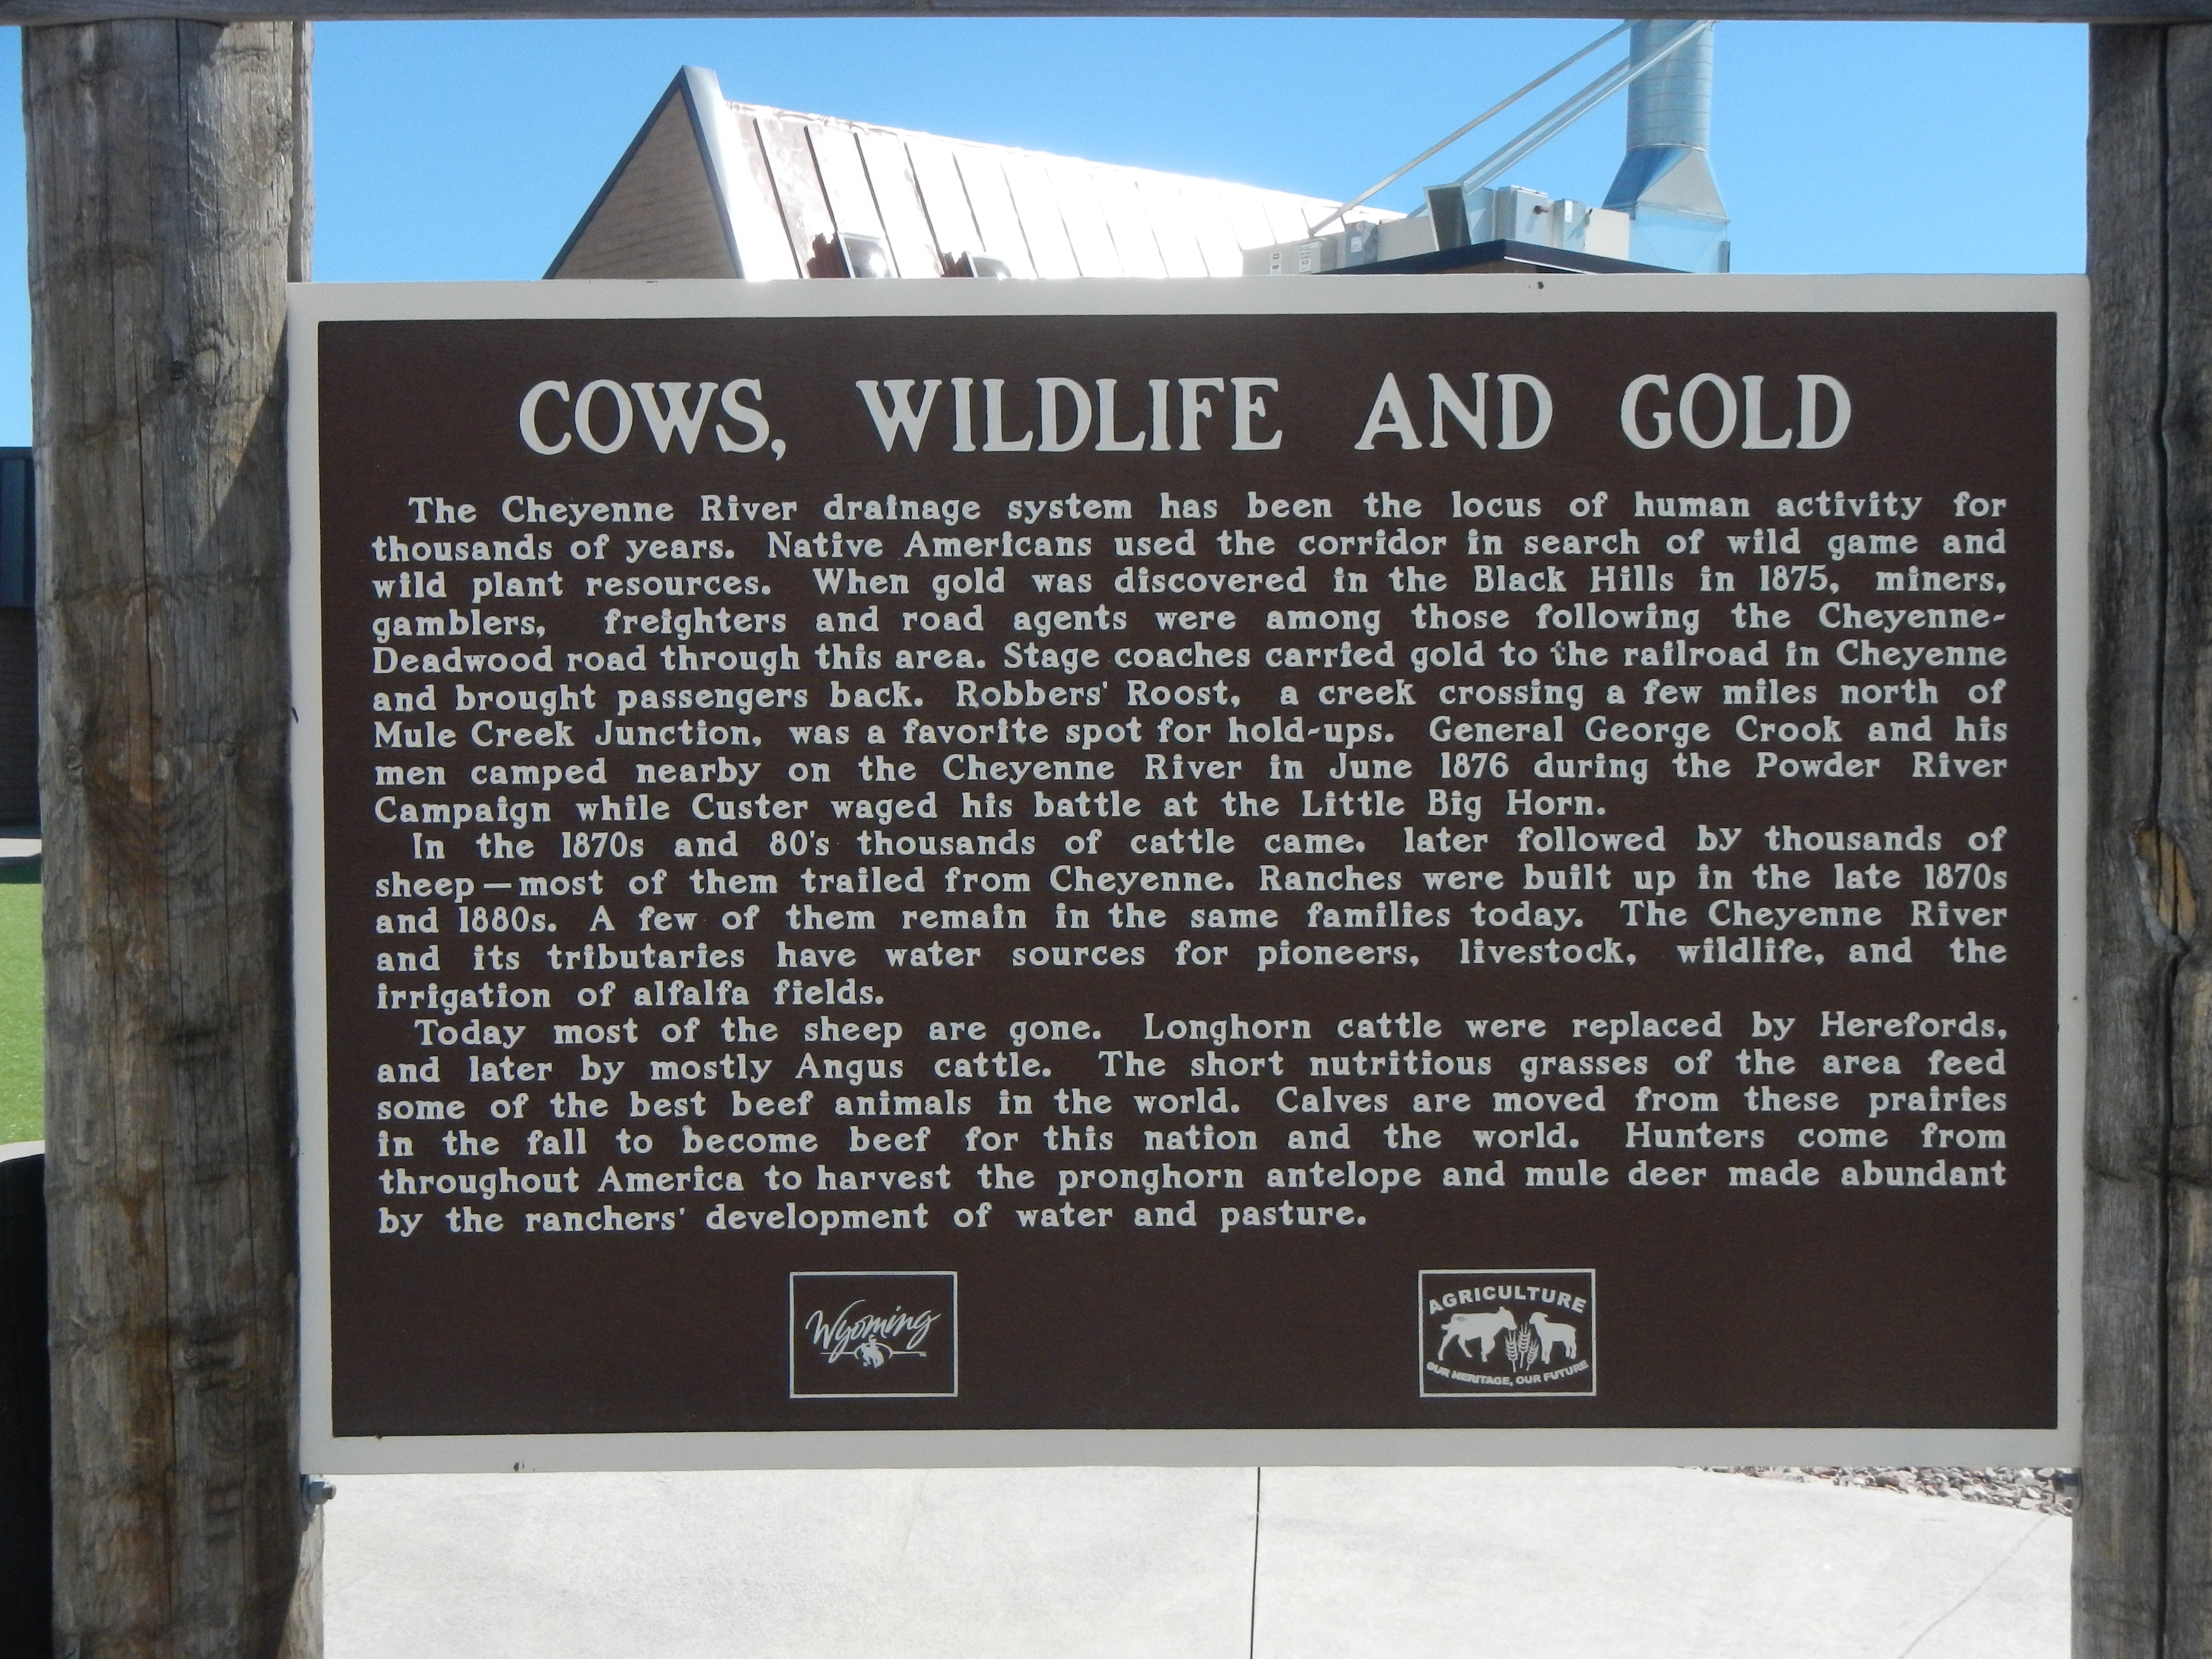 Cows, Wildlife and Gold Marker